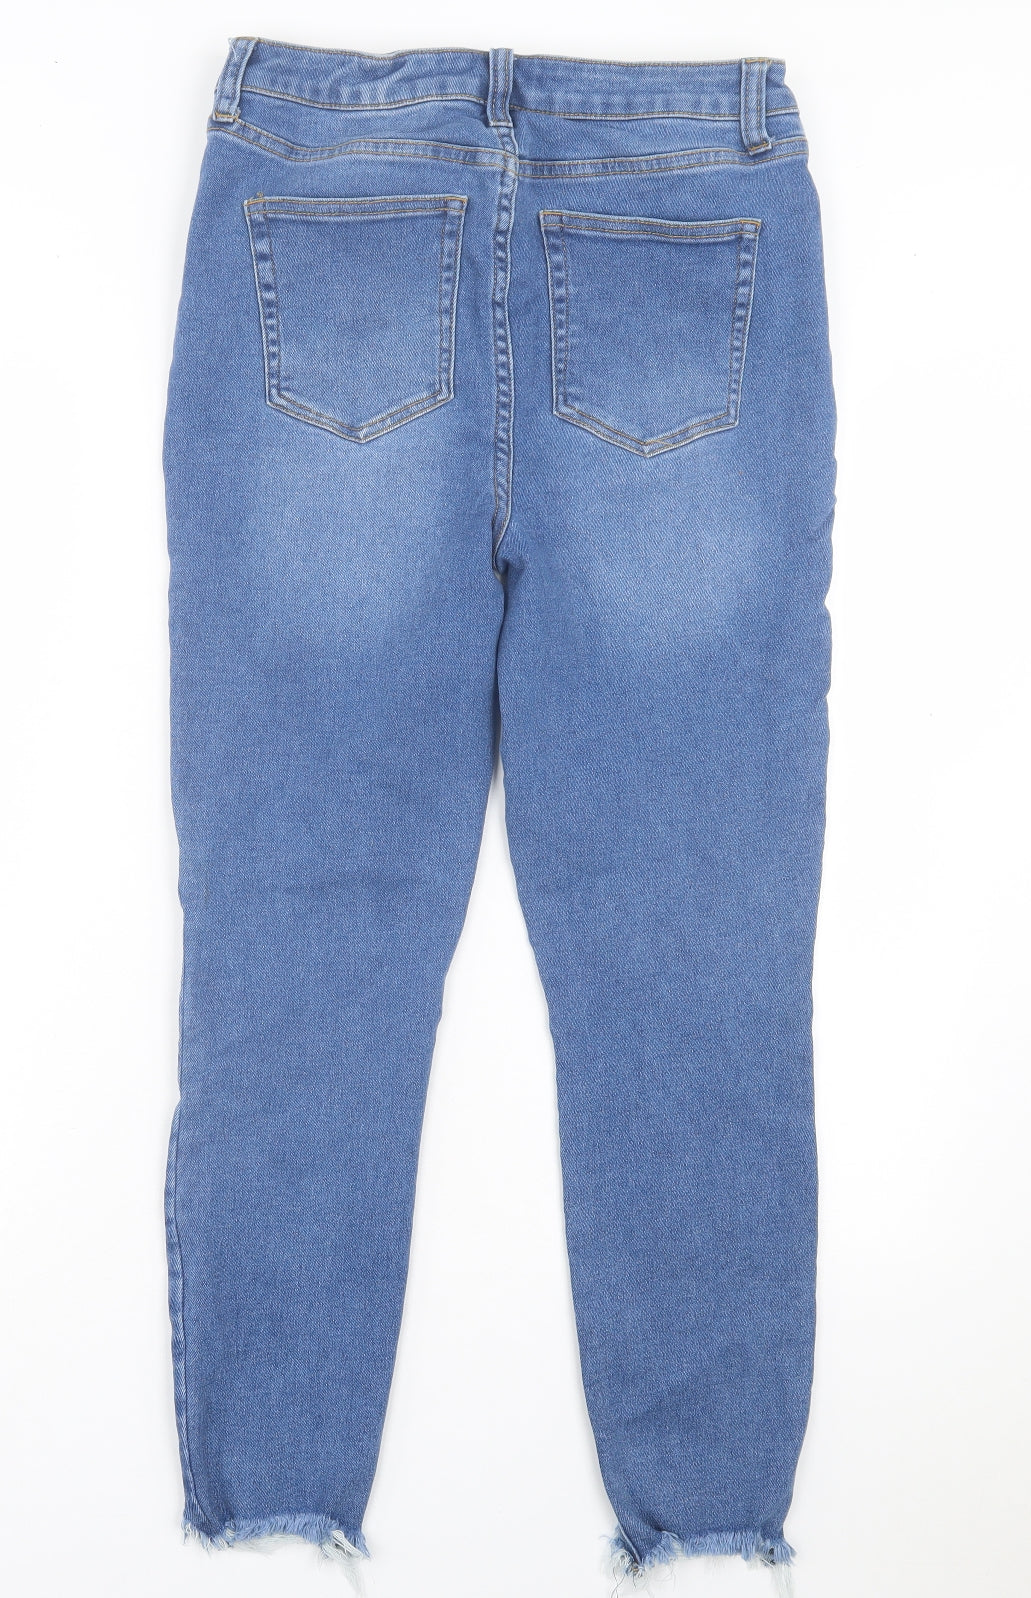 JustFab Womens Blue Cotton Skinny Jeans Size 32 in L26 in Regular Button - Ankle Grazer